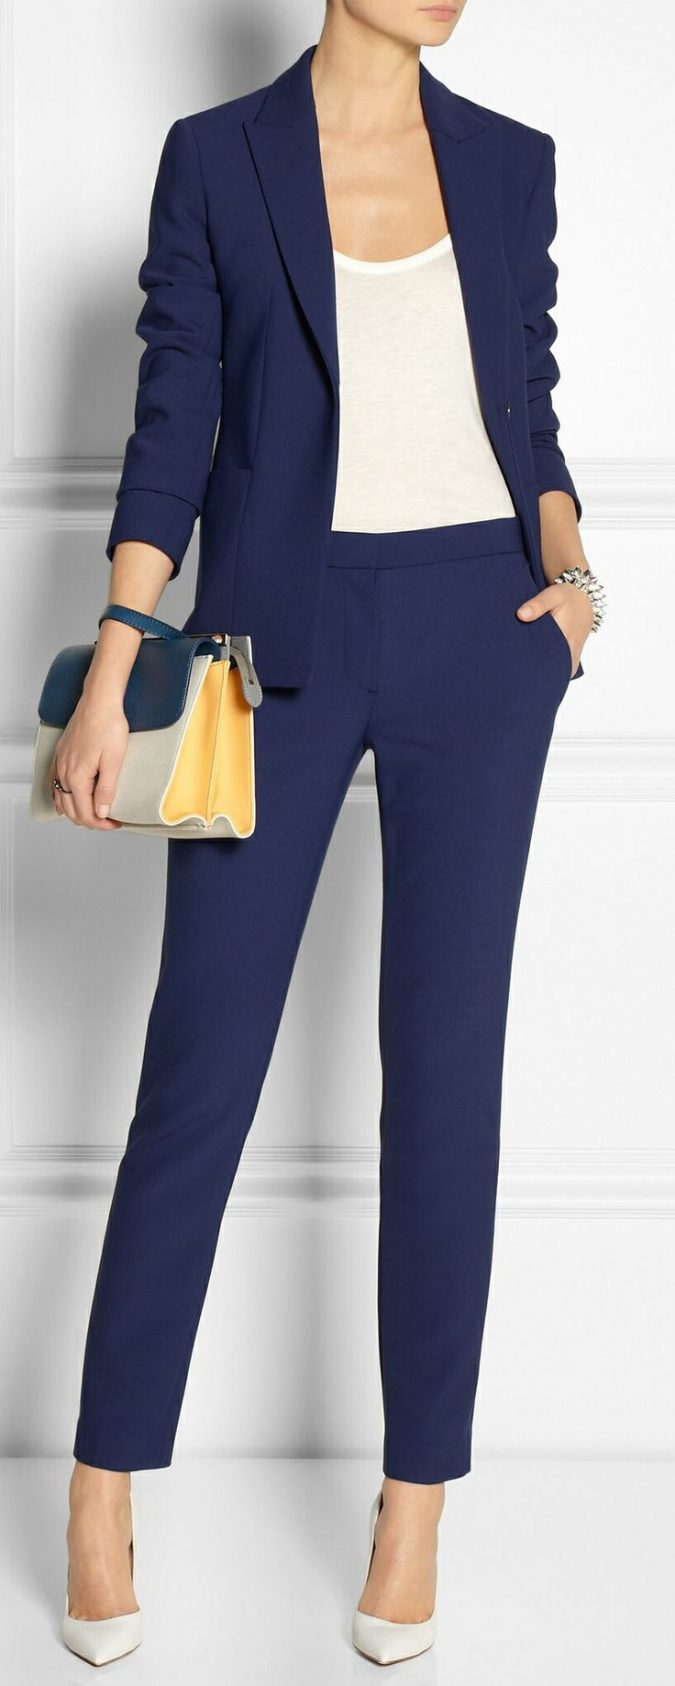 Colorful Suit3 25+ Elegant Work Outfit Ideas That Every Working Woman Should Have - 47